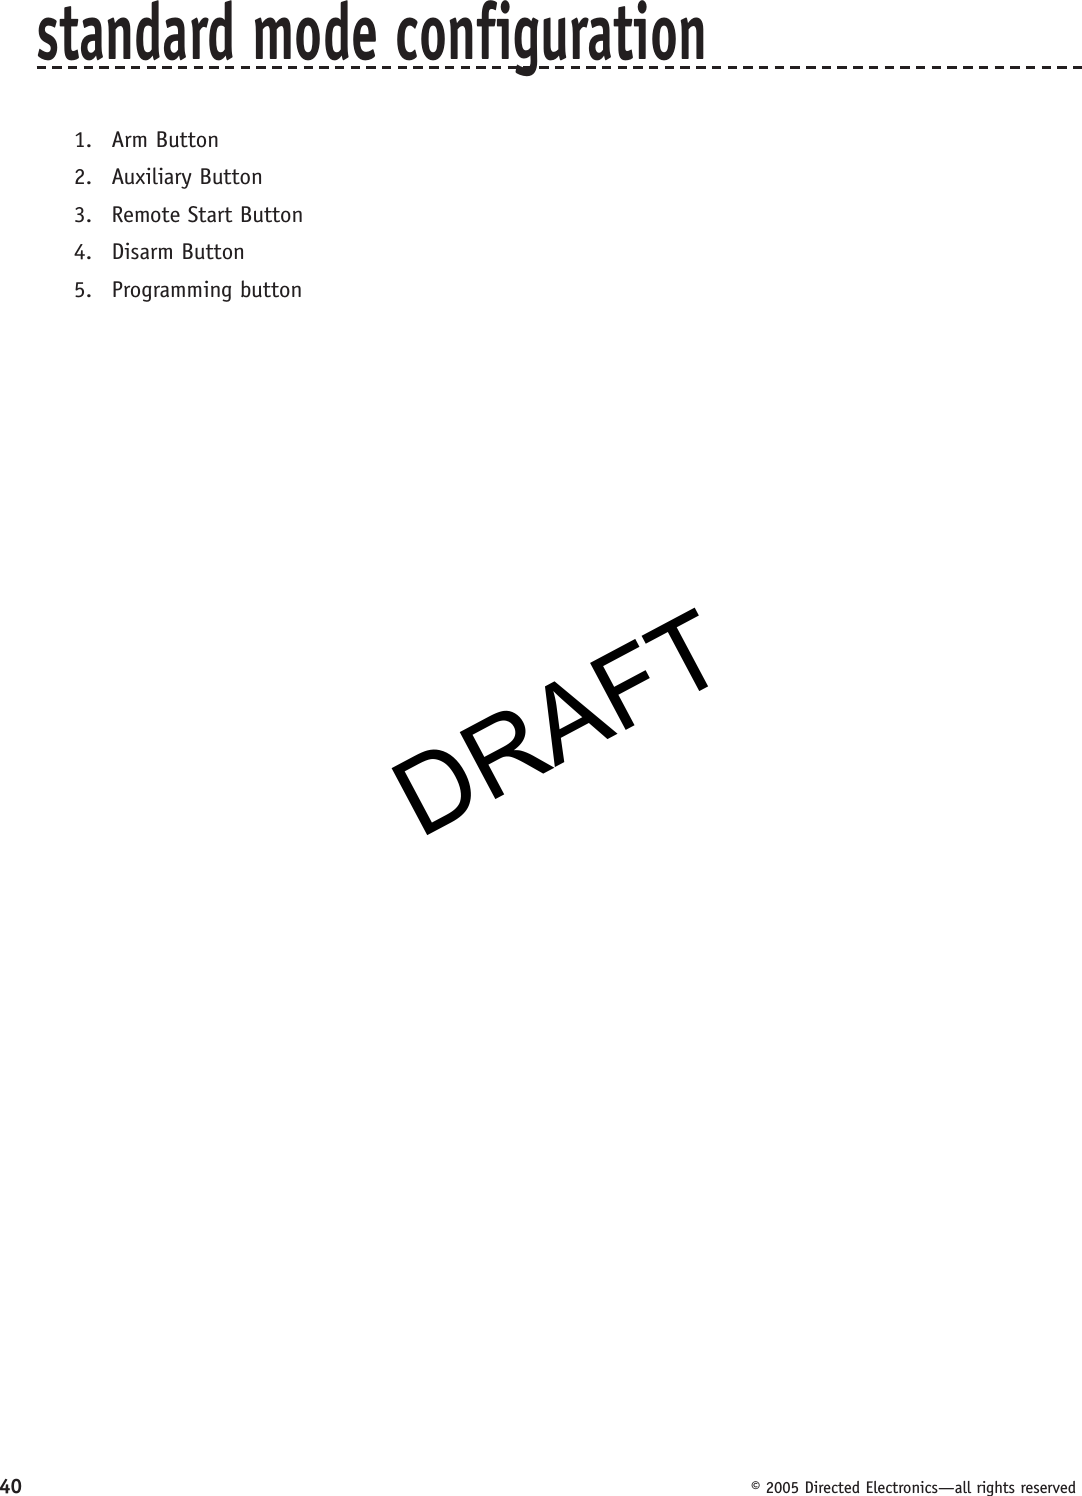 DRAFT40  © 2005 Directed Electronics—all rights reservedstandard mode configuration1. Arm Button2. Auxiliary Button3.  Remote Start Button4. Disarm Button5. Programming buttonDRAFT